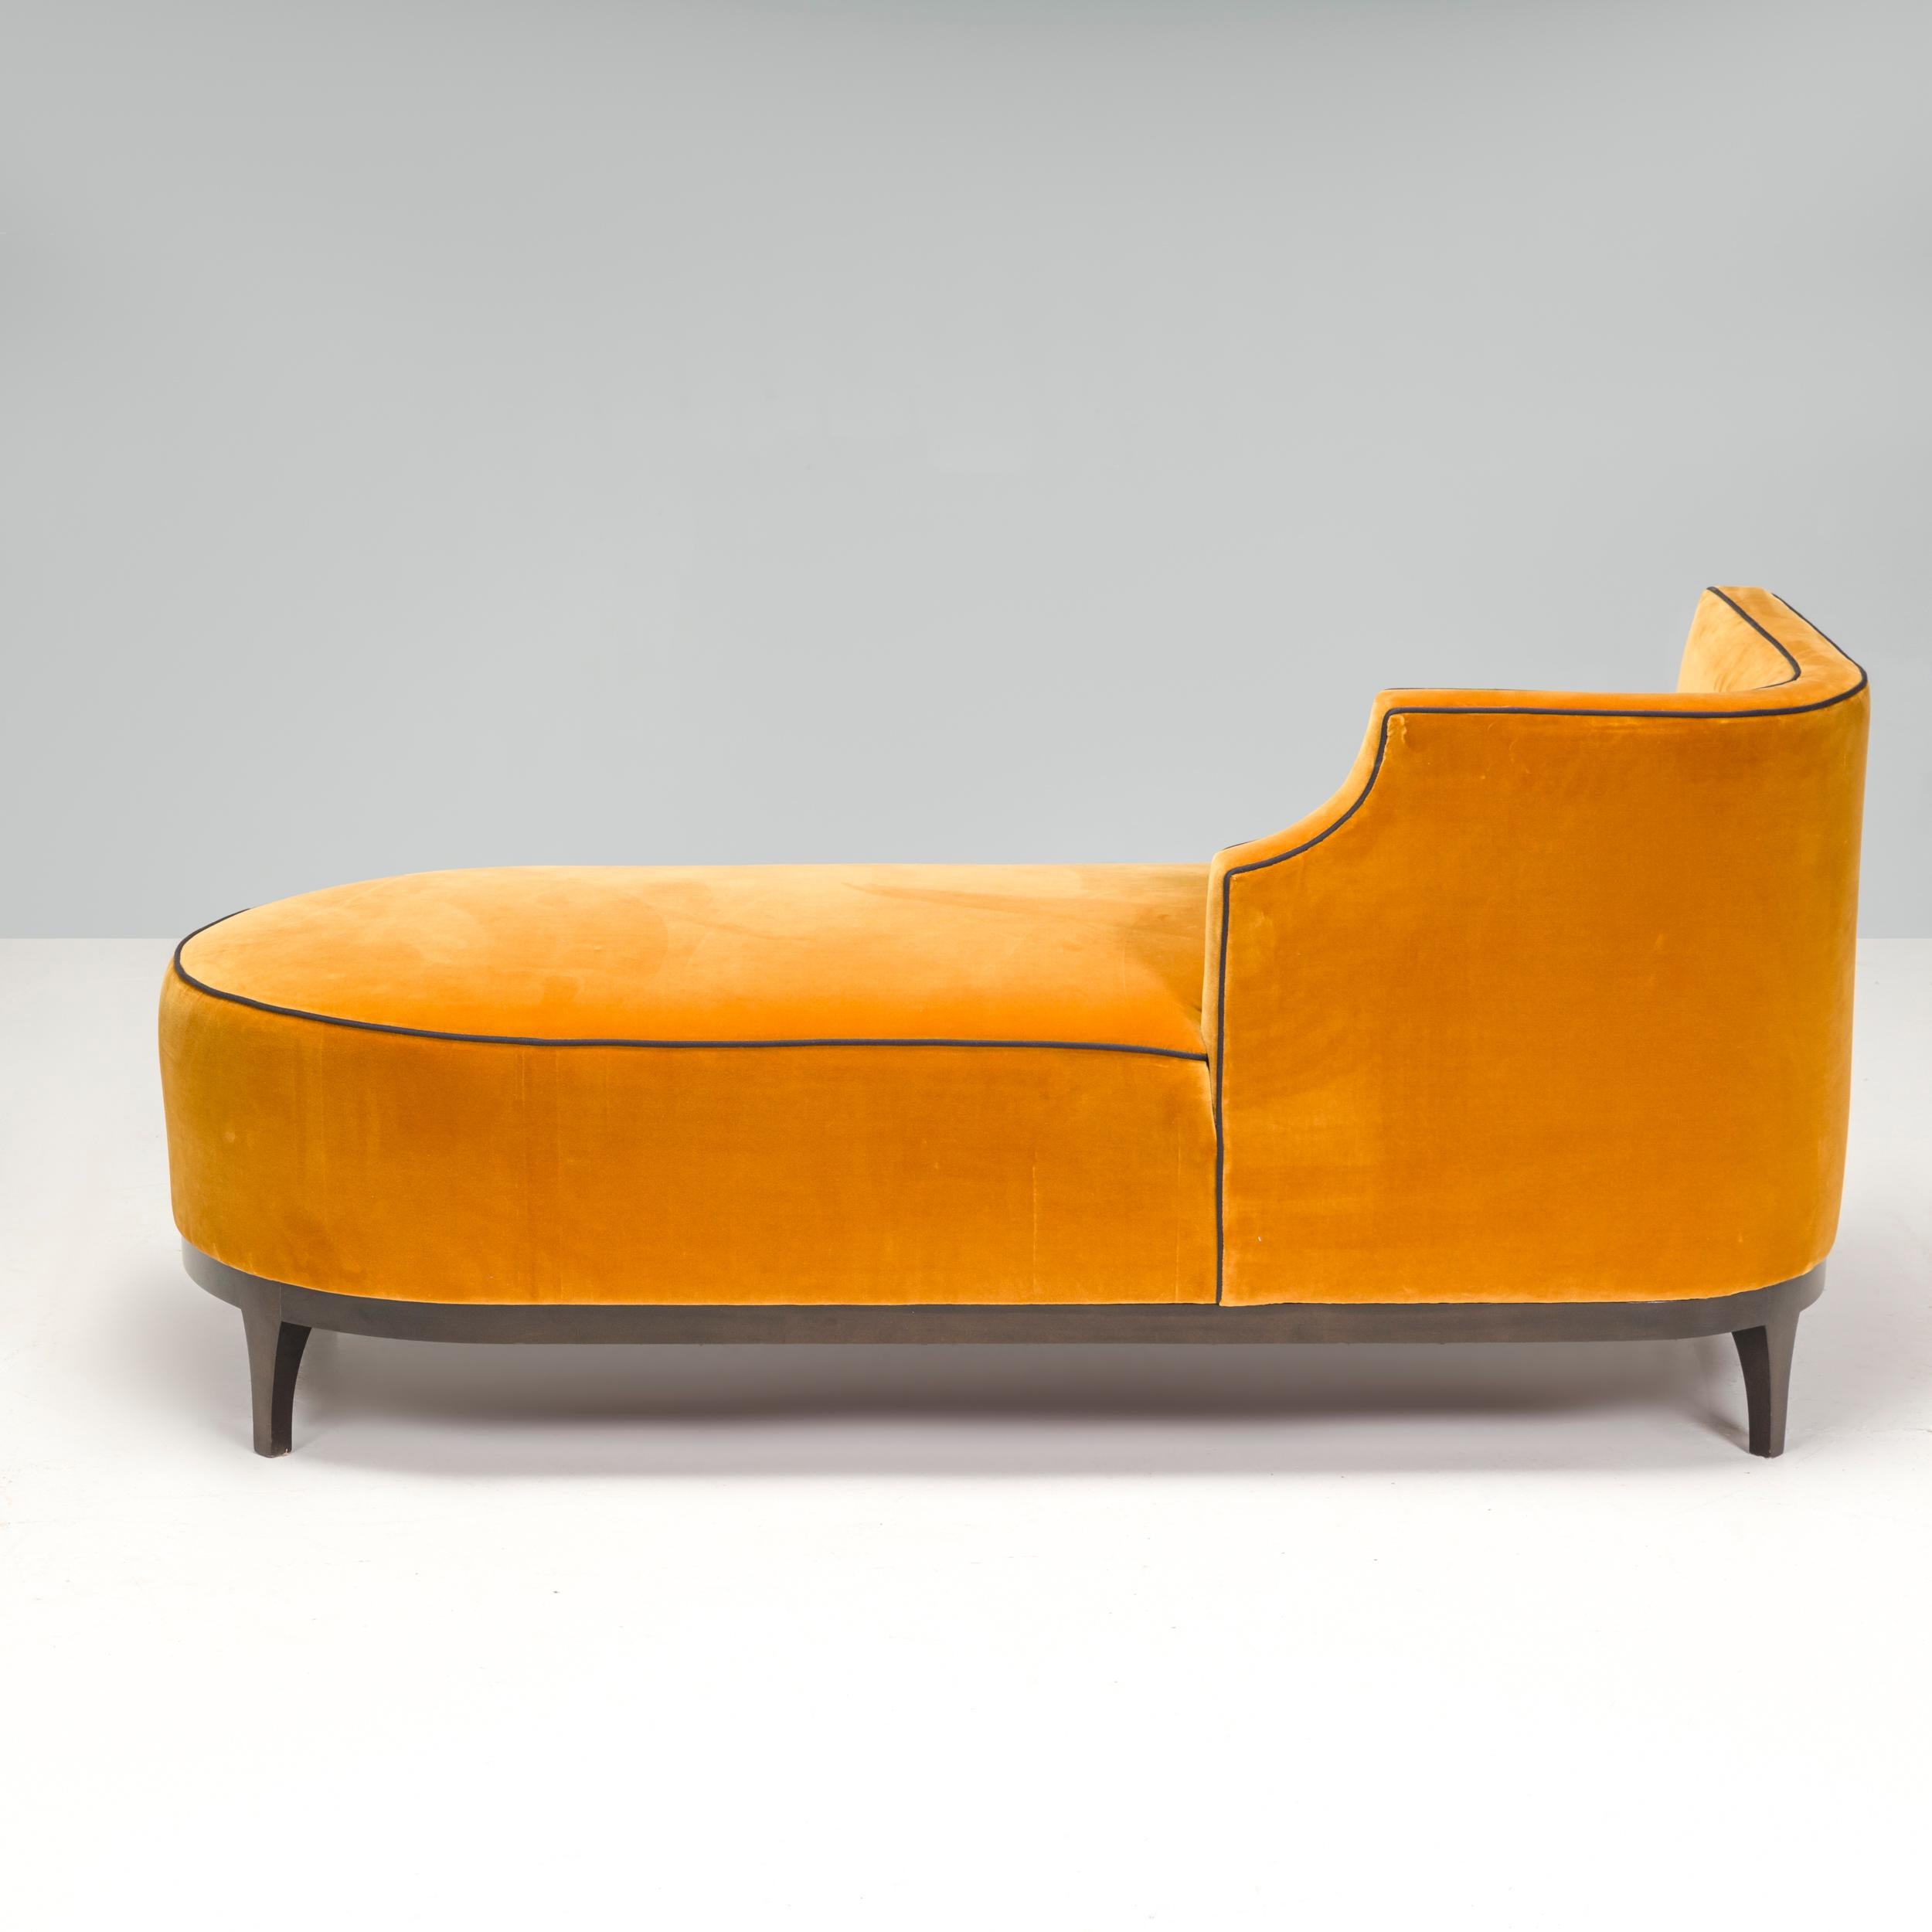 British Bespoke Art Deco Style Mustard Yellow Velvet Chaise Longue With Grey Piping  For Sale